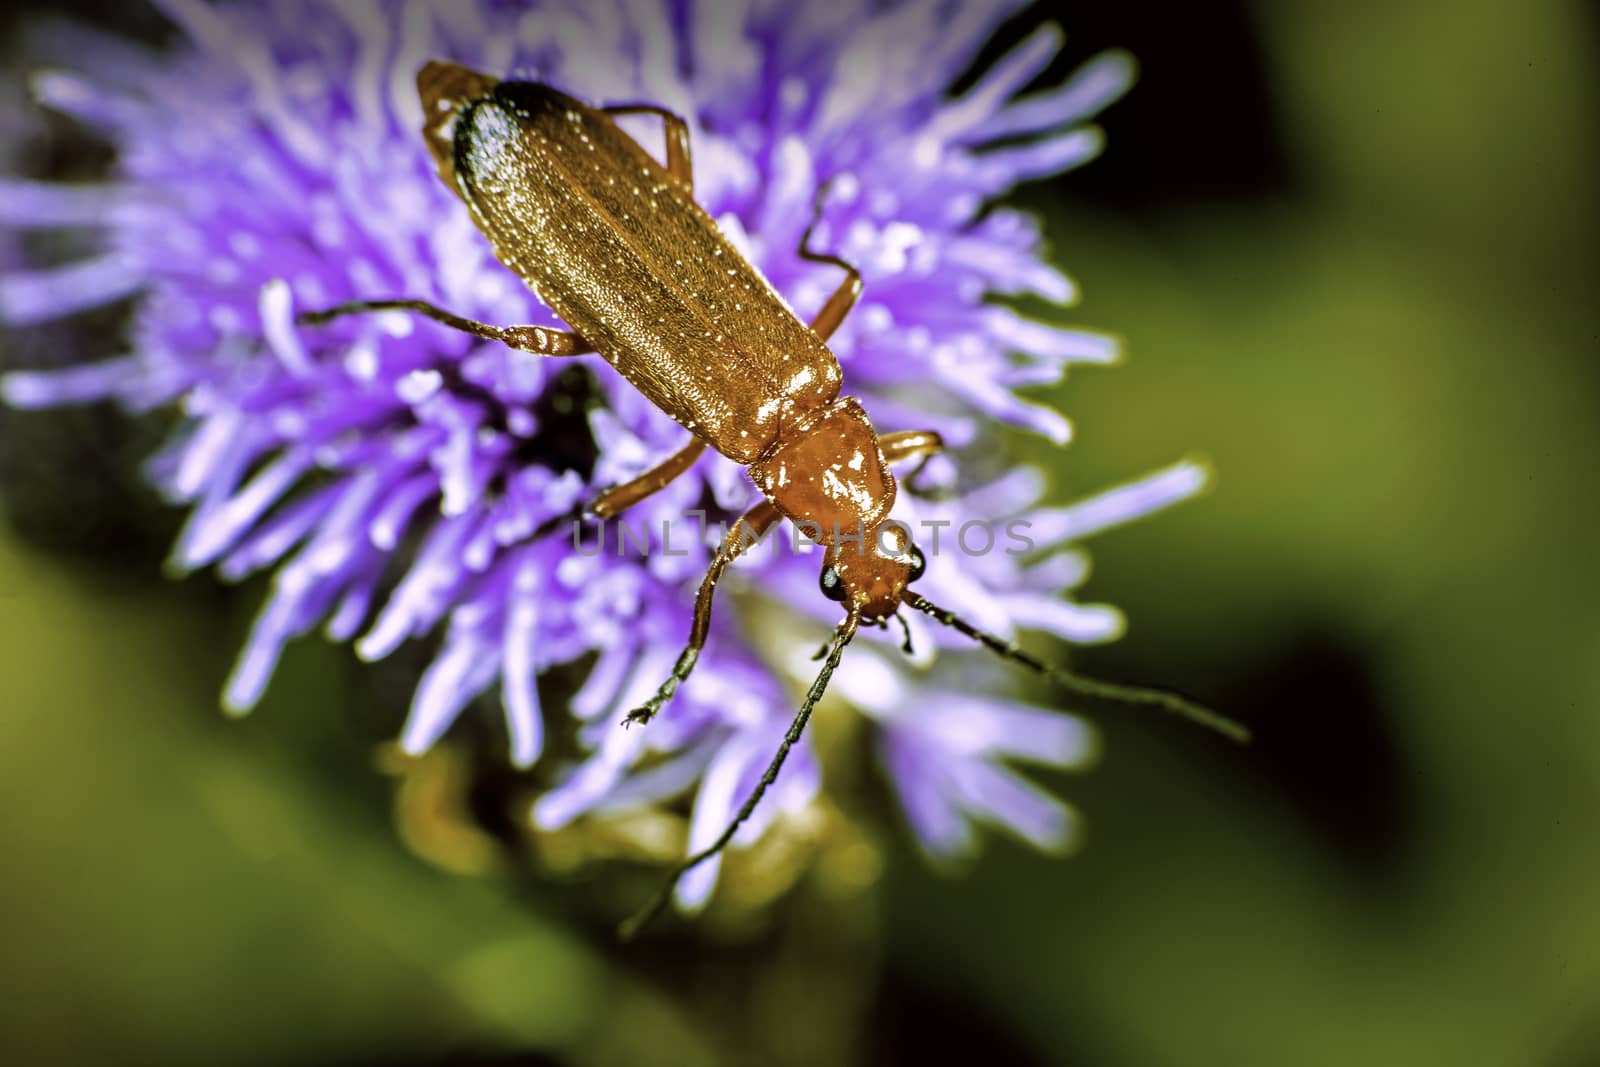 comon red soldier beetle by thomas_males